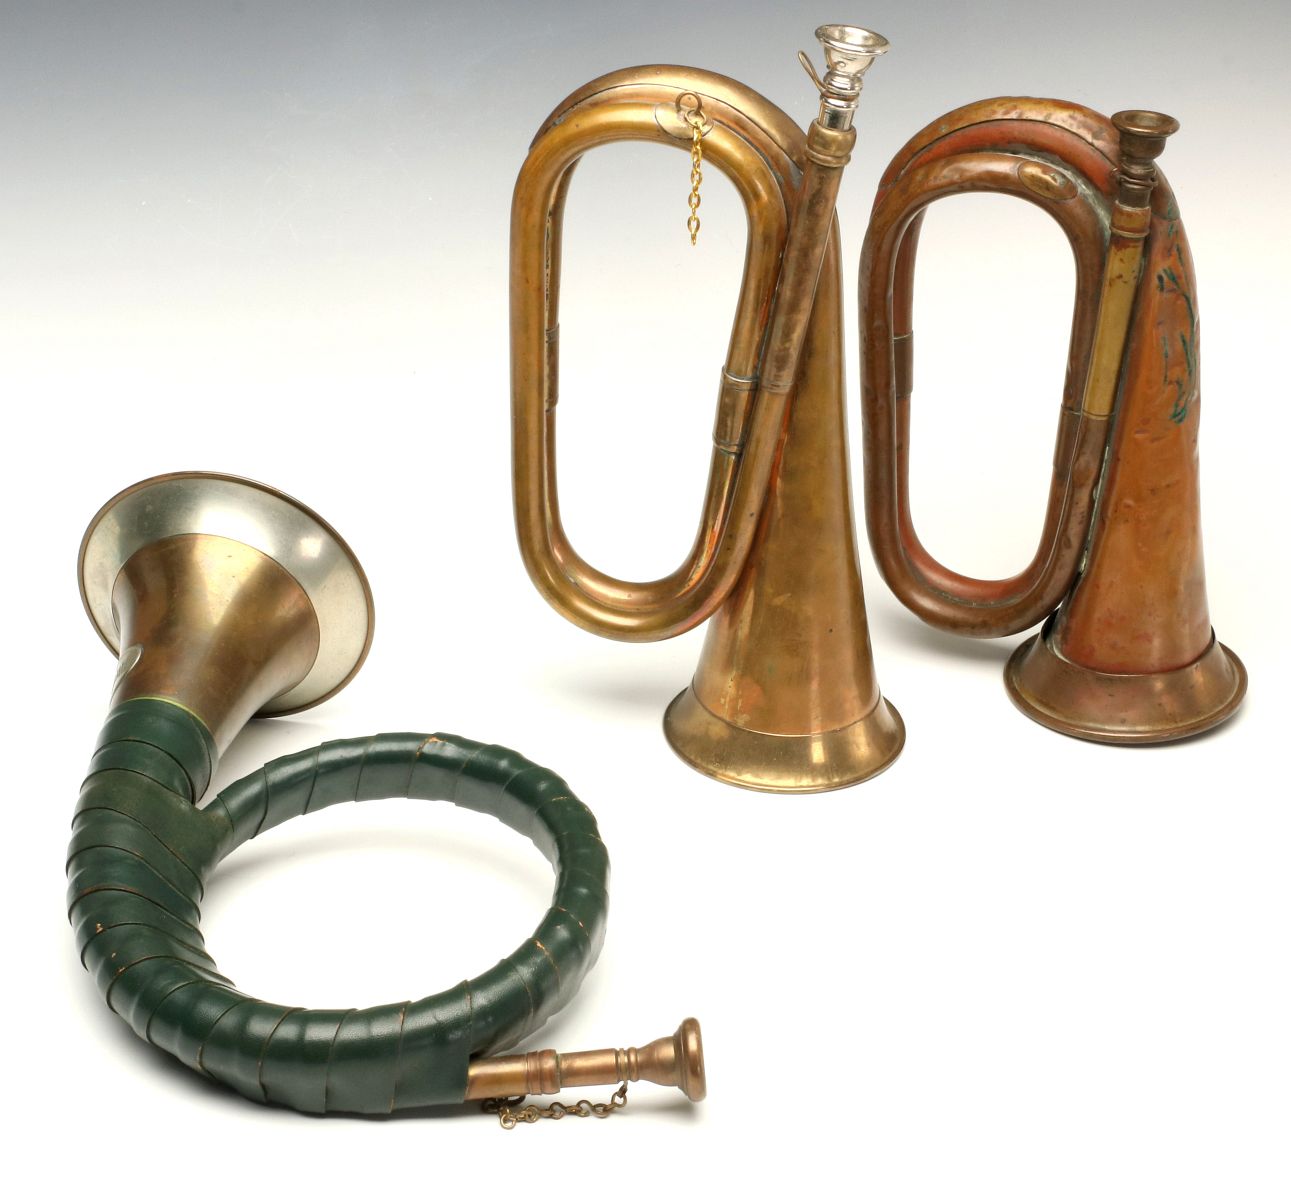 COPPER AND BRASS BUGLES AND HUNTING HORN